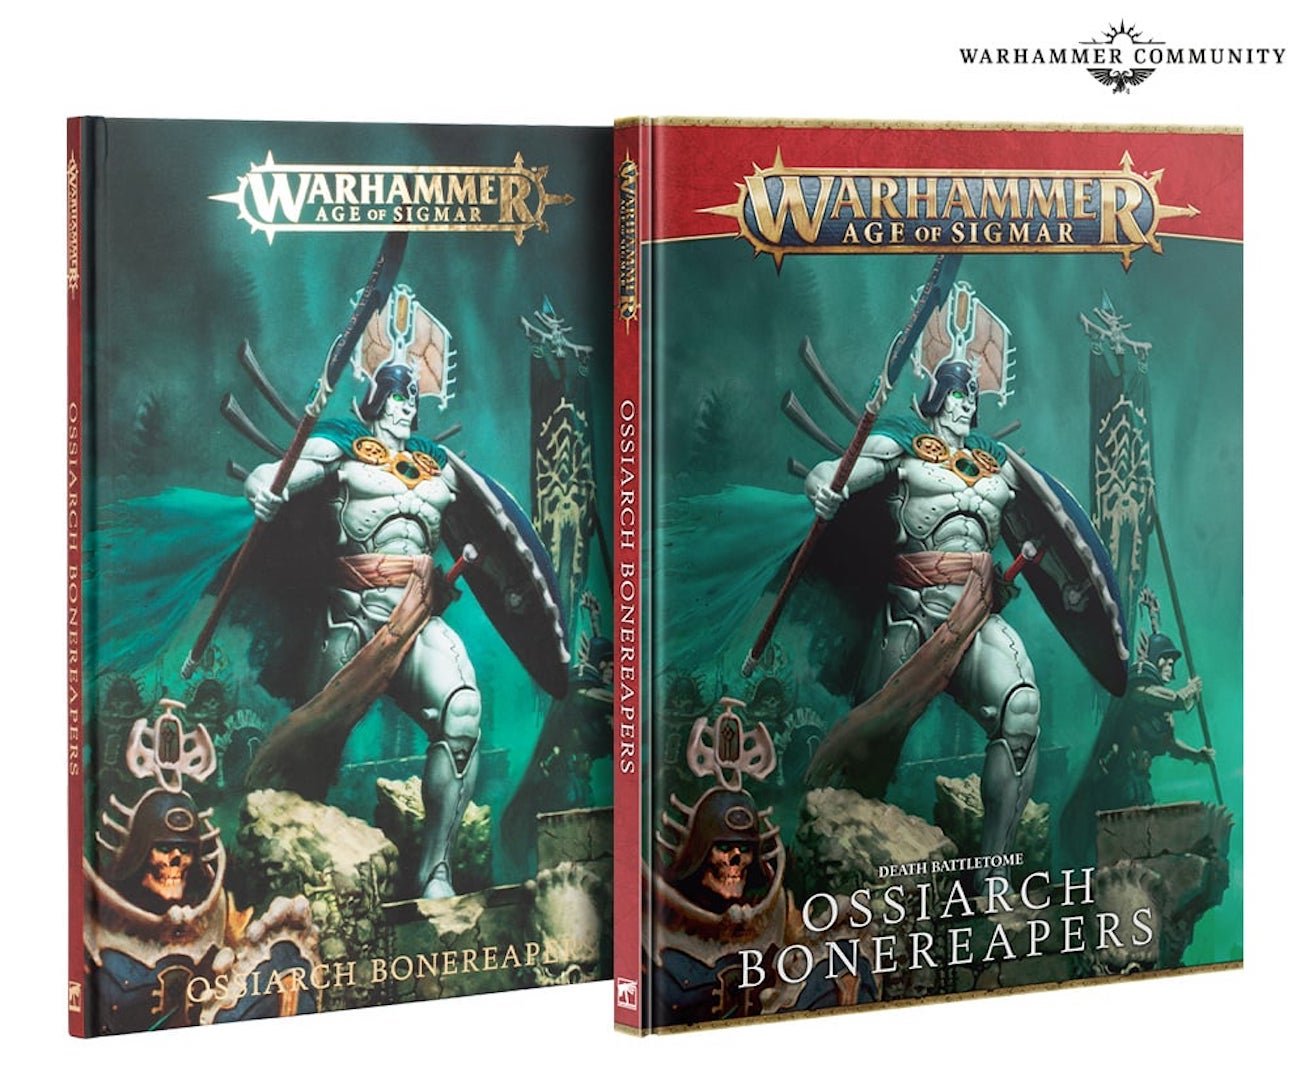 An image of the Warhammer Age of Sigmar Ossiarch Bonereapers Battletome